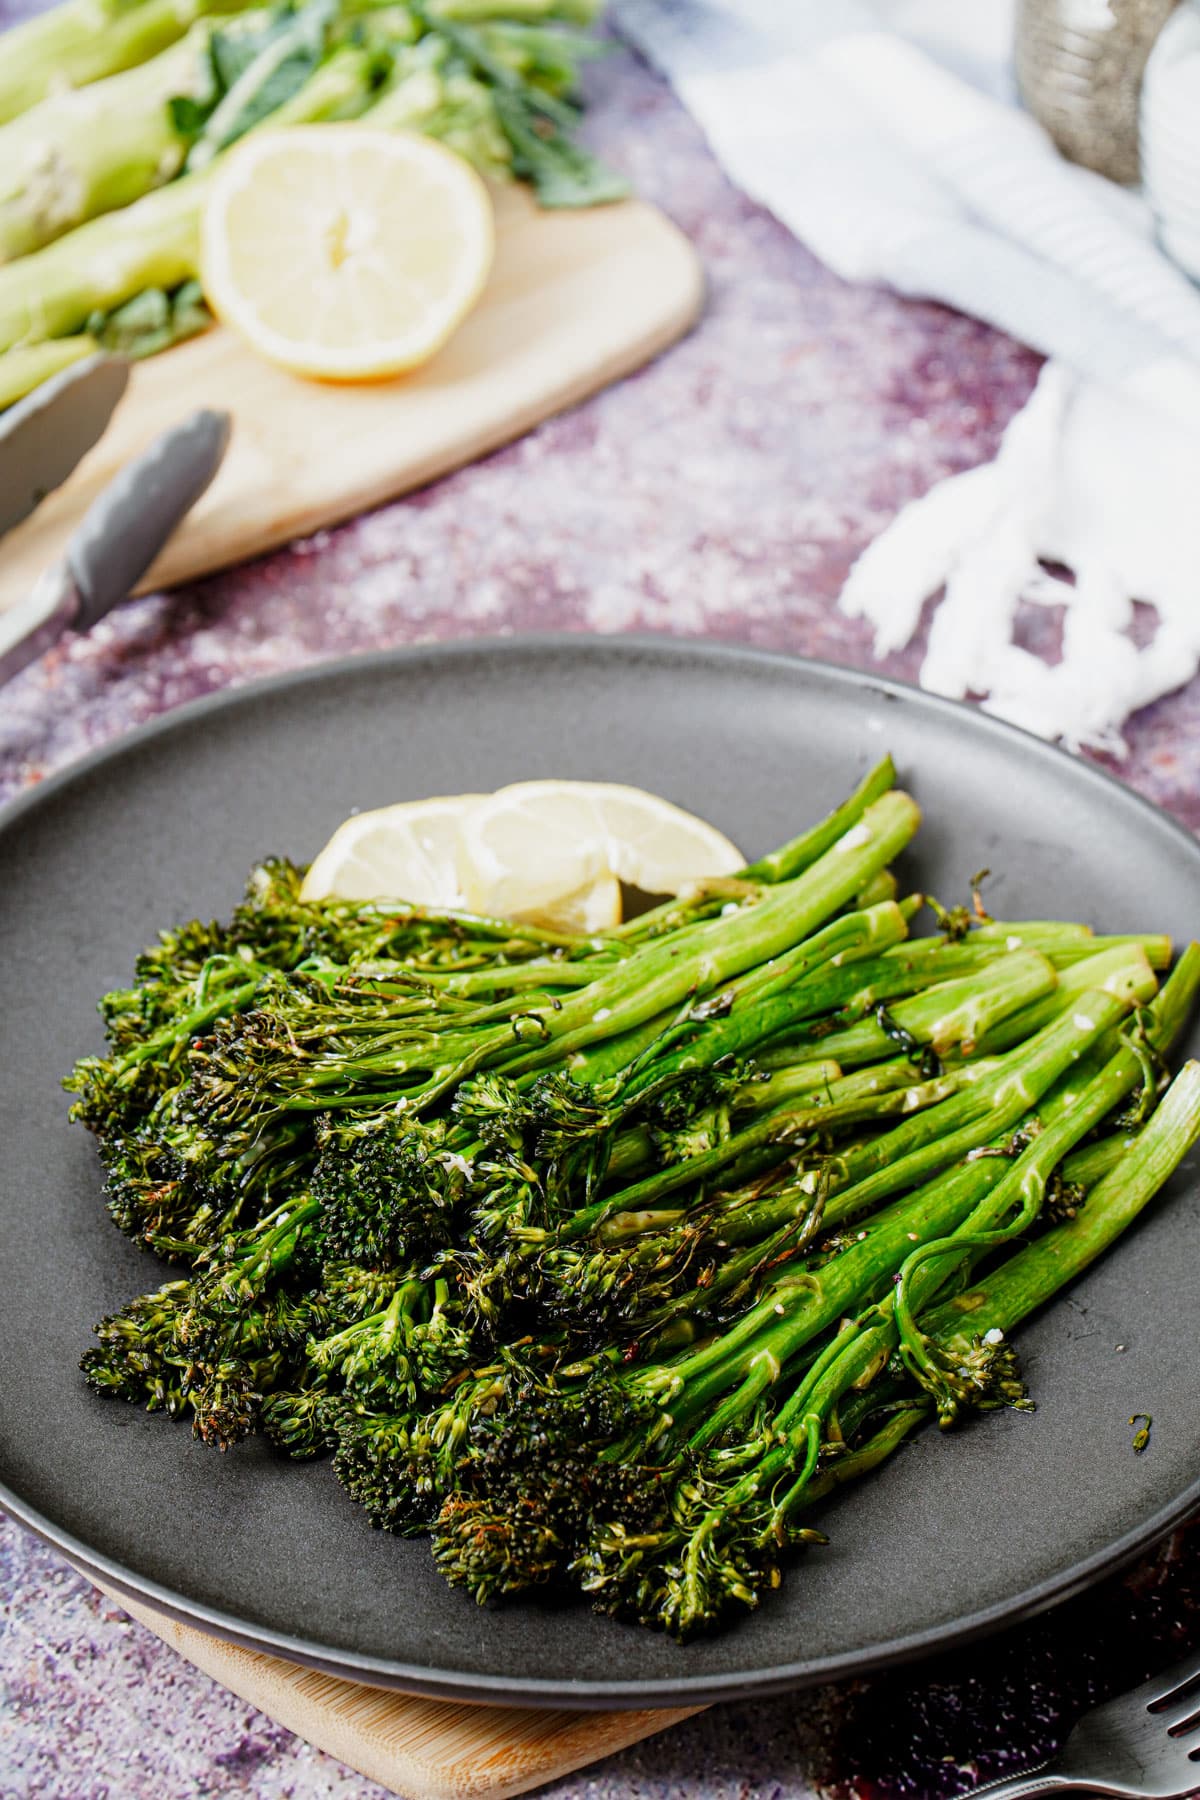 Roasted air fryer broccolini recipe bite shot, with lemon wedges